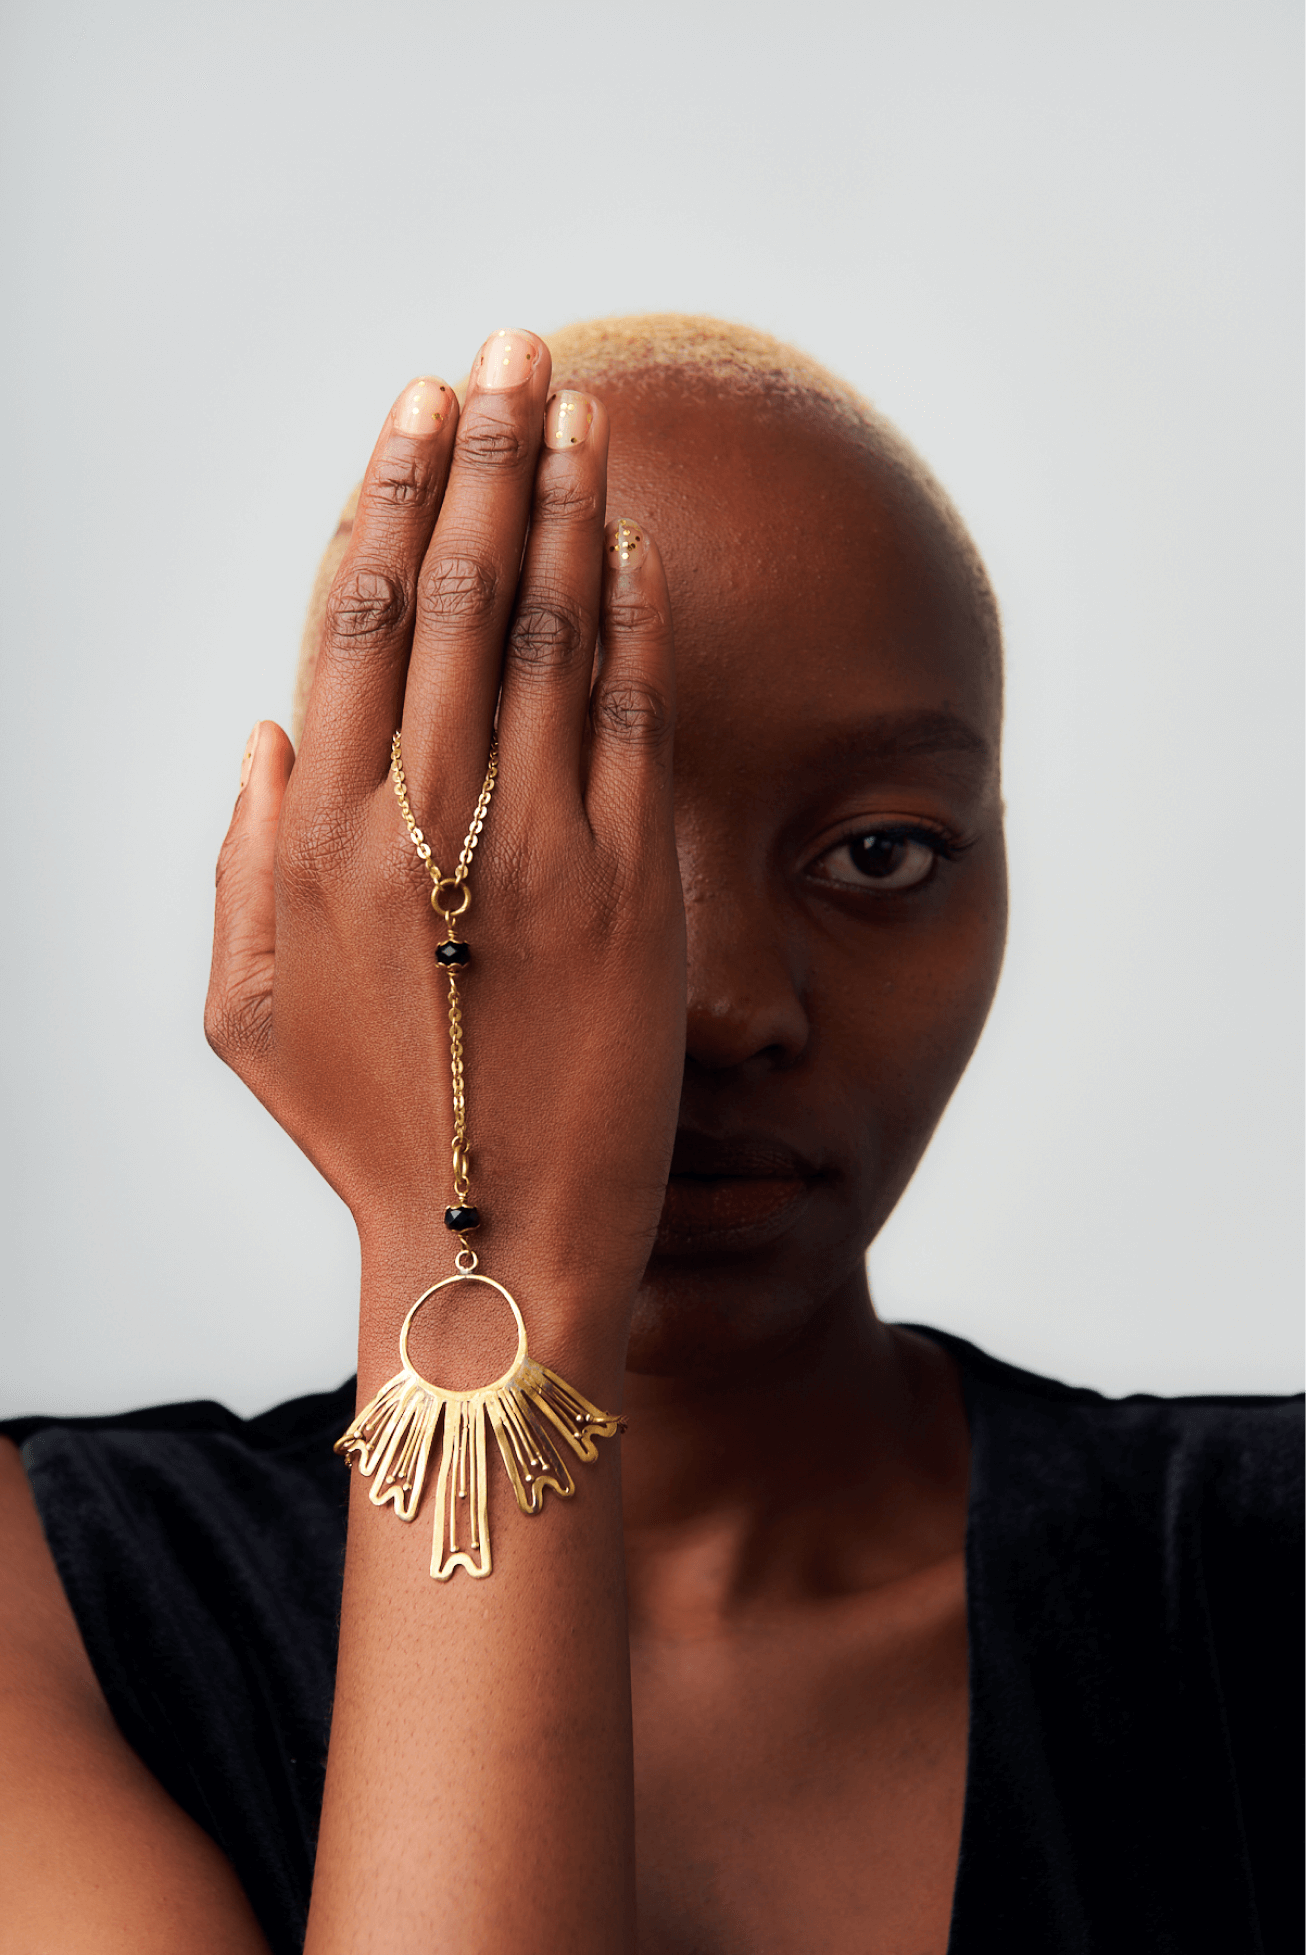 Shop Kanga Flower No.4 Bracelet by Tiger Tail Twister on Arrai. Discover stylish, affordable clothing, jewelry, handbags and unique handmade pieces from top Kenyan & African fashion brands prioritising sustainability and quality craftsmanship.